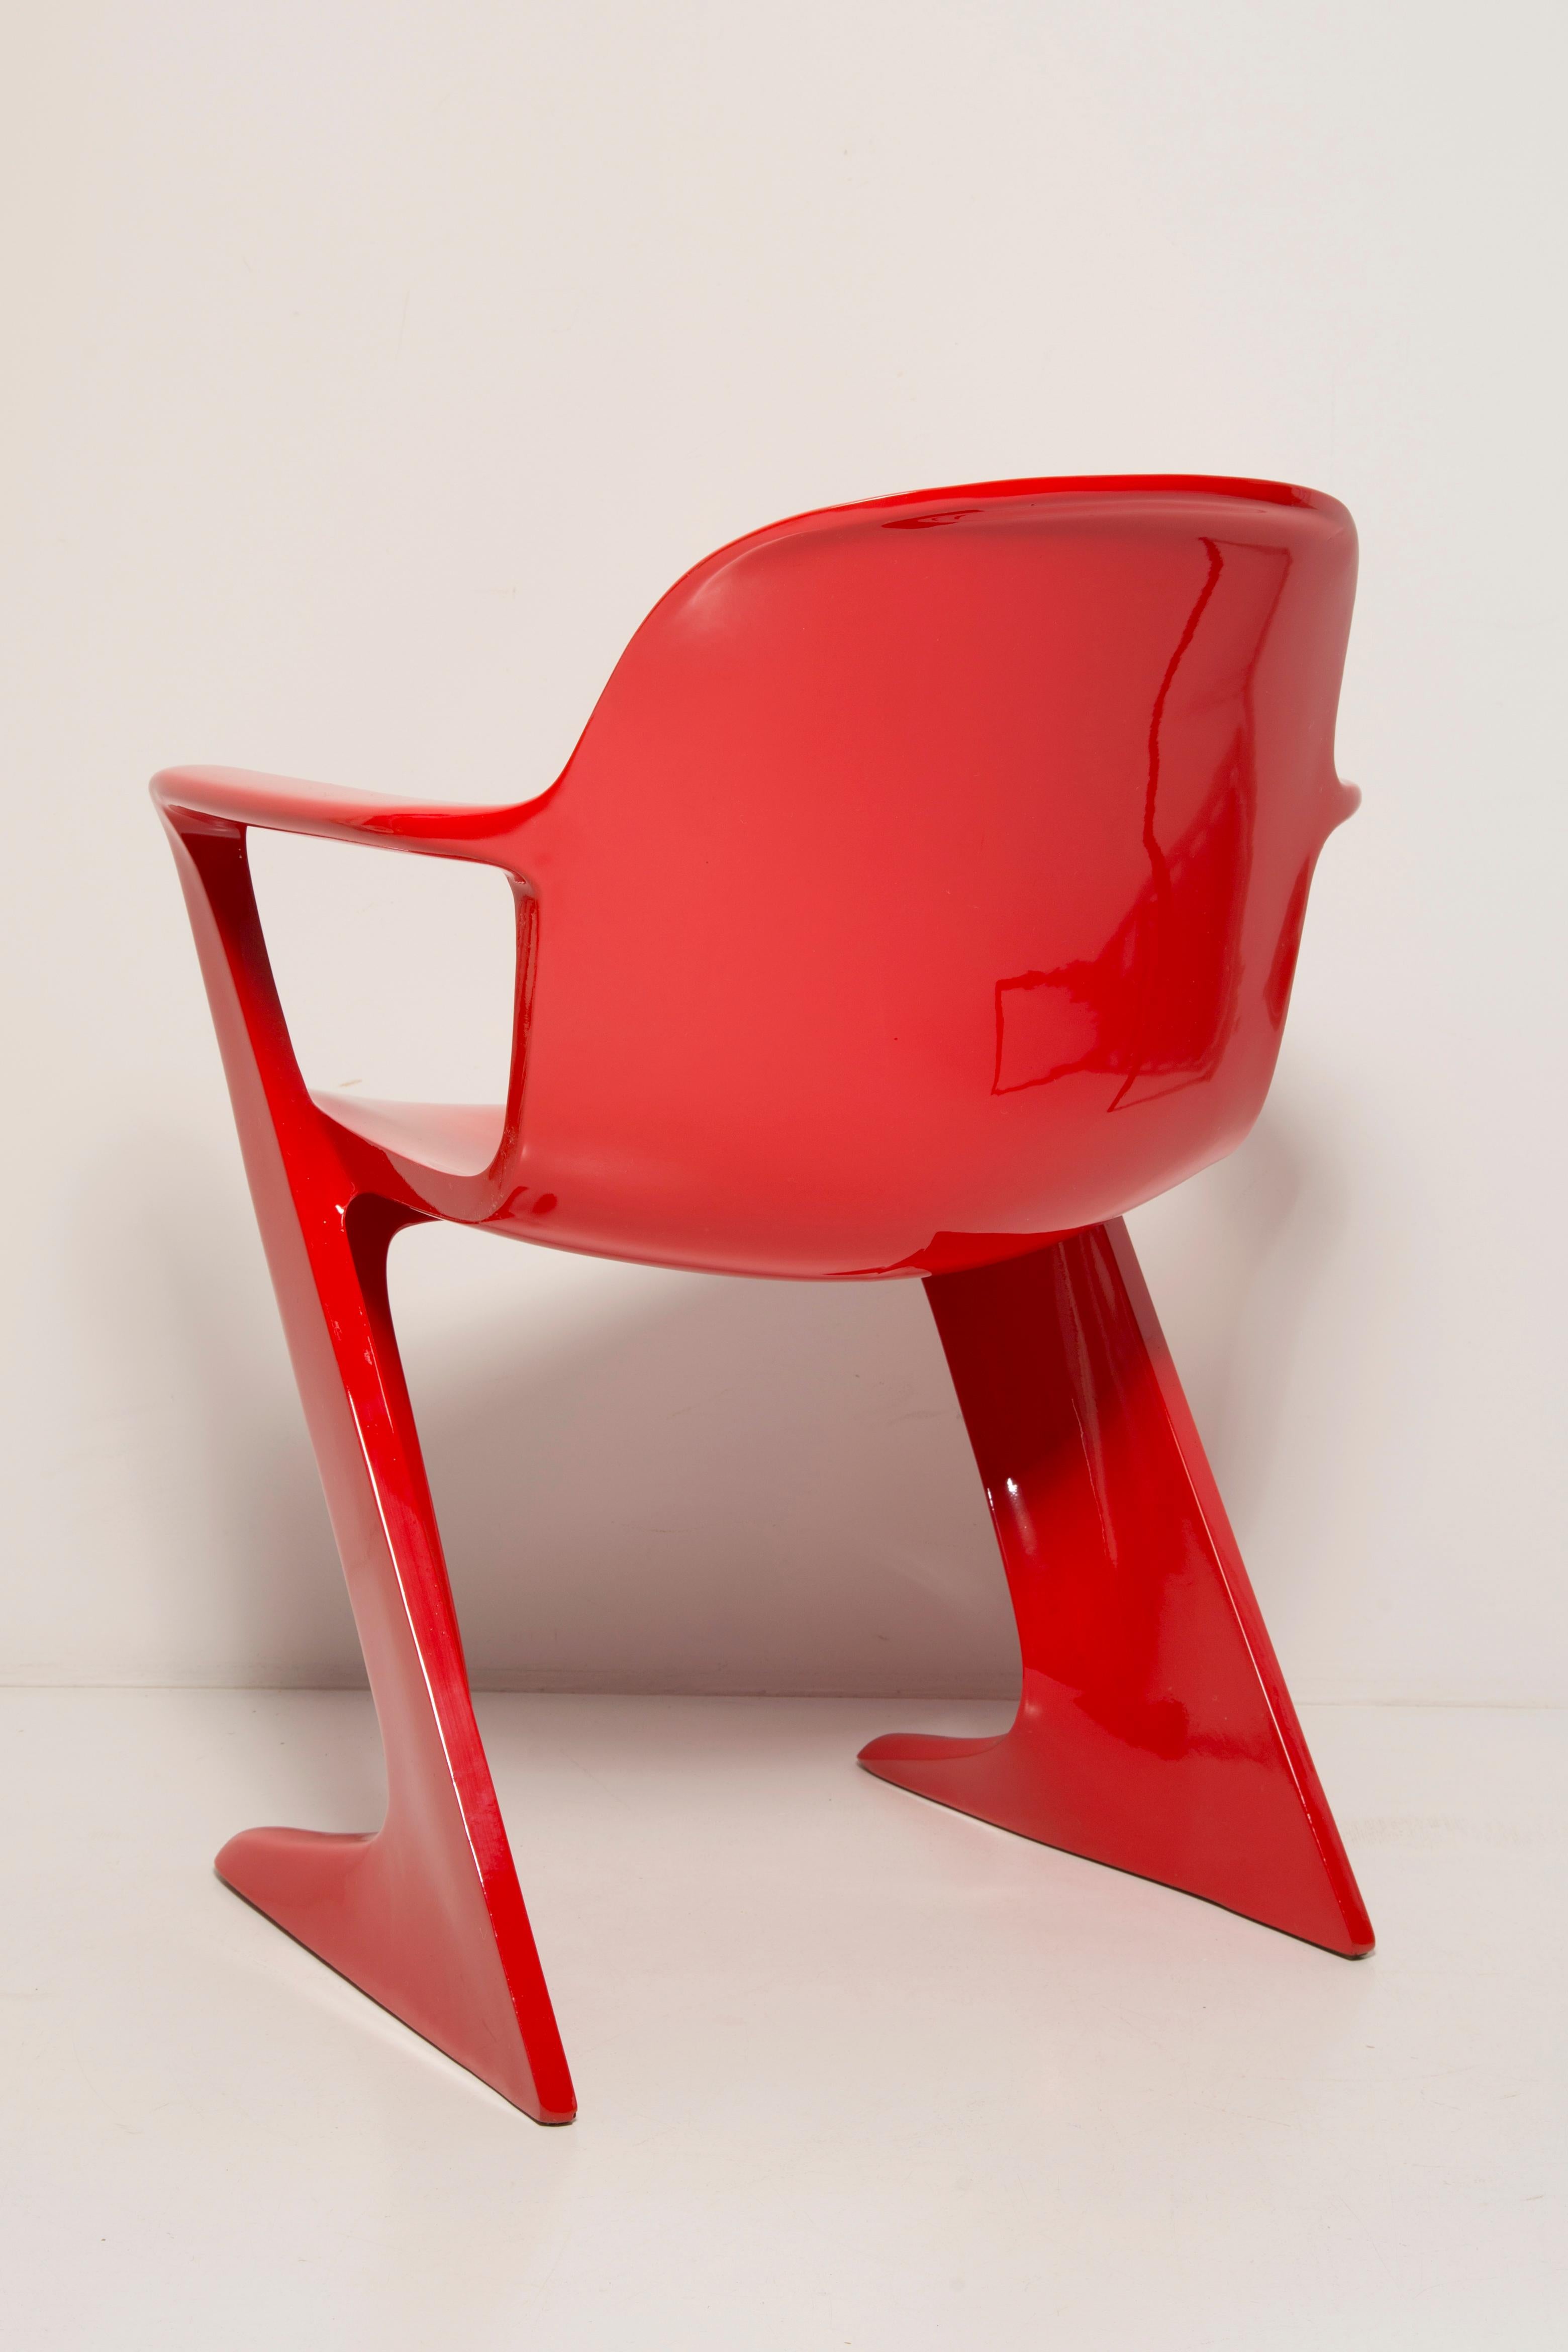 Midcentury Signal Red Kangaroo Chair Designed by Ernst Moeckl, Germany, 1968 For Sale 6